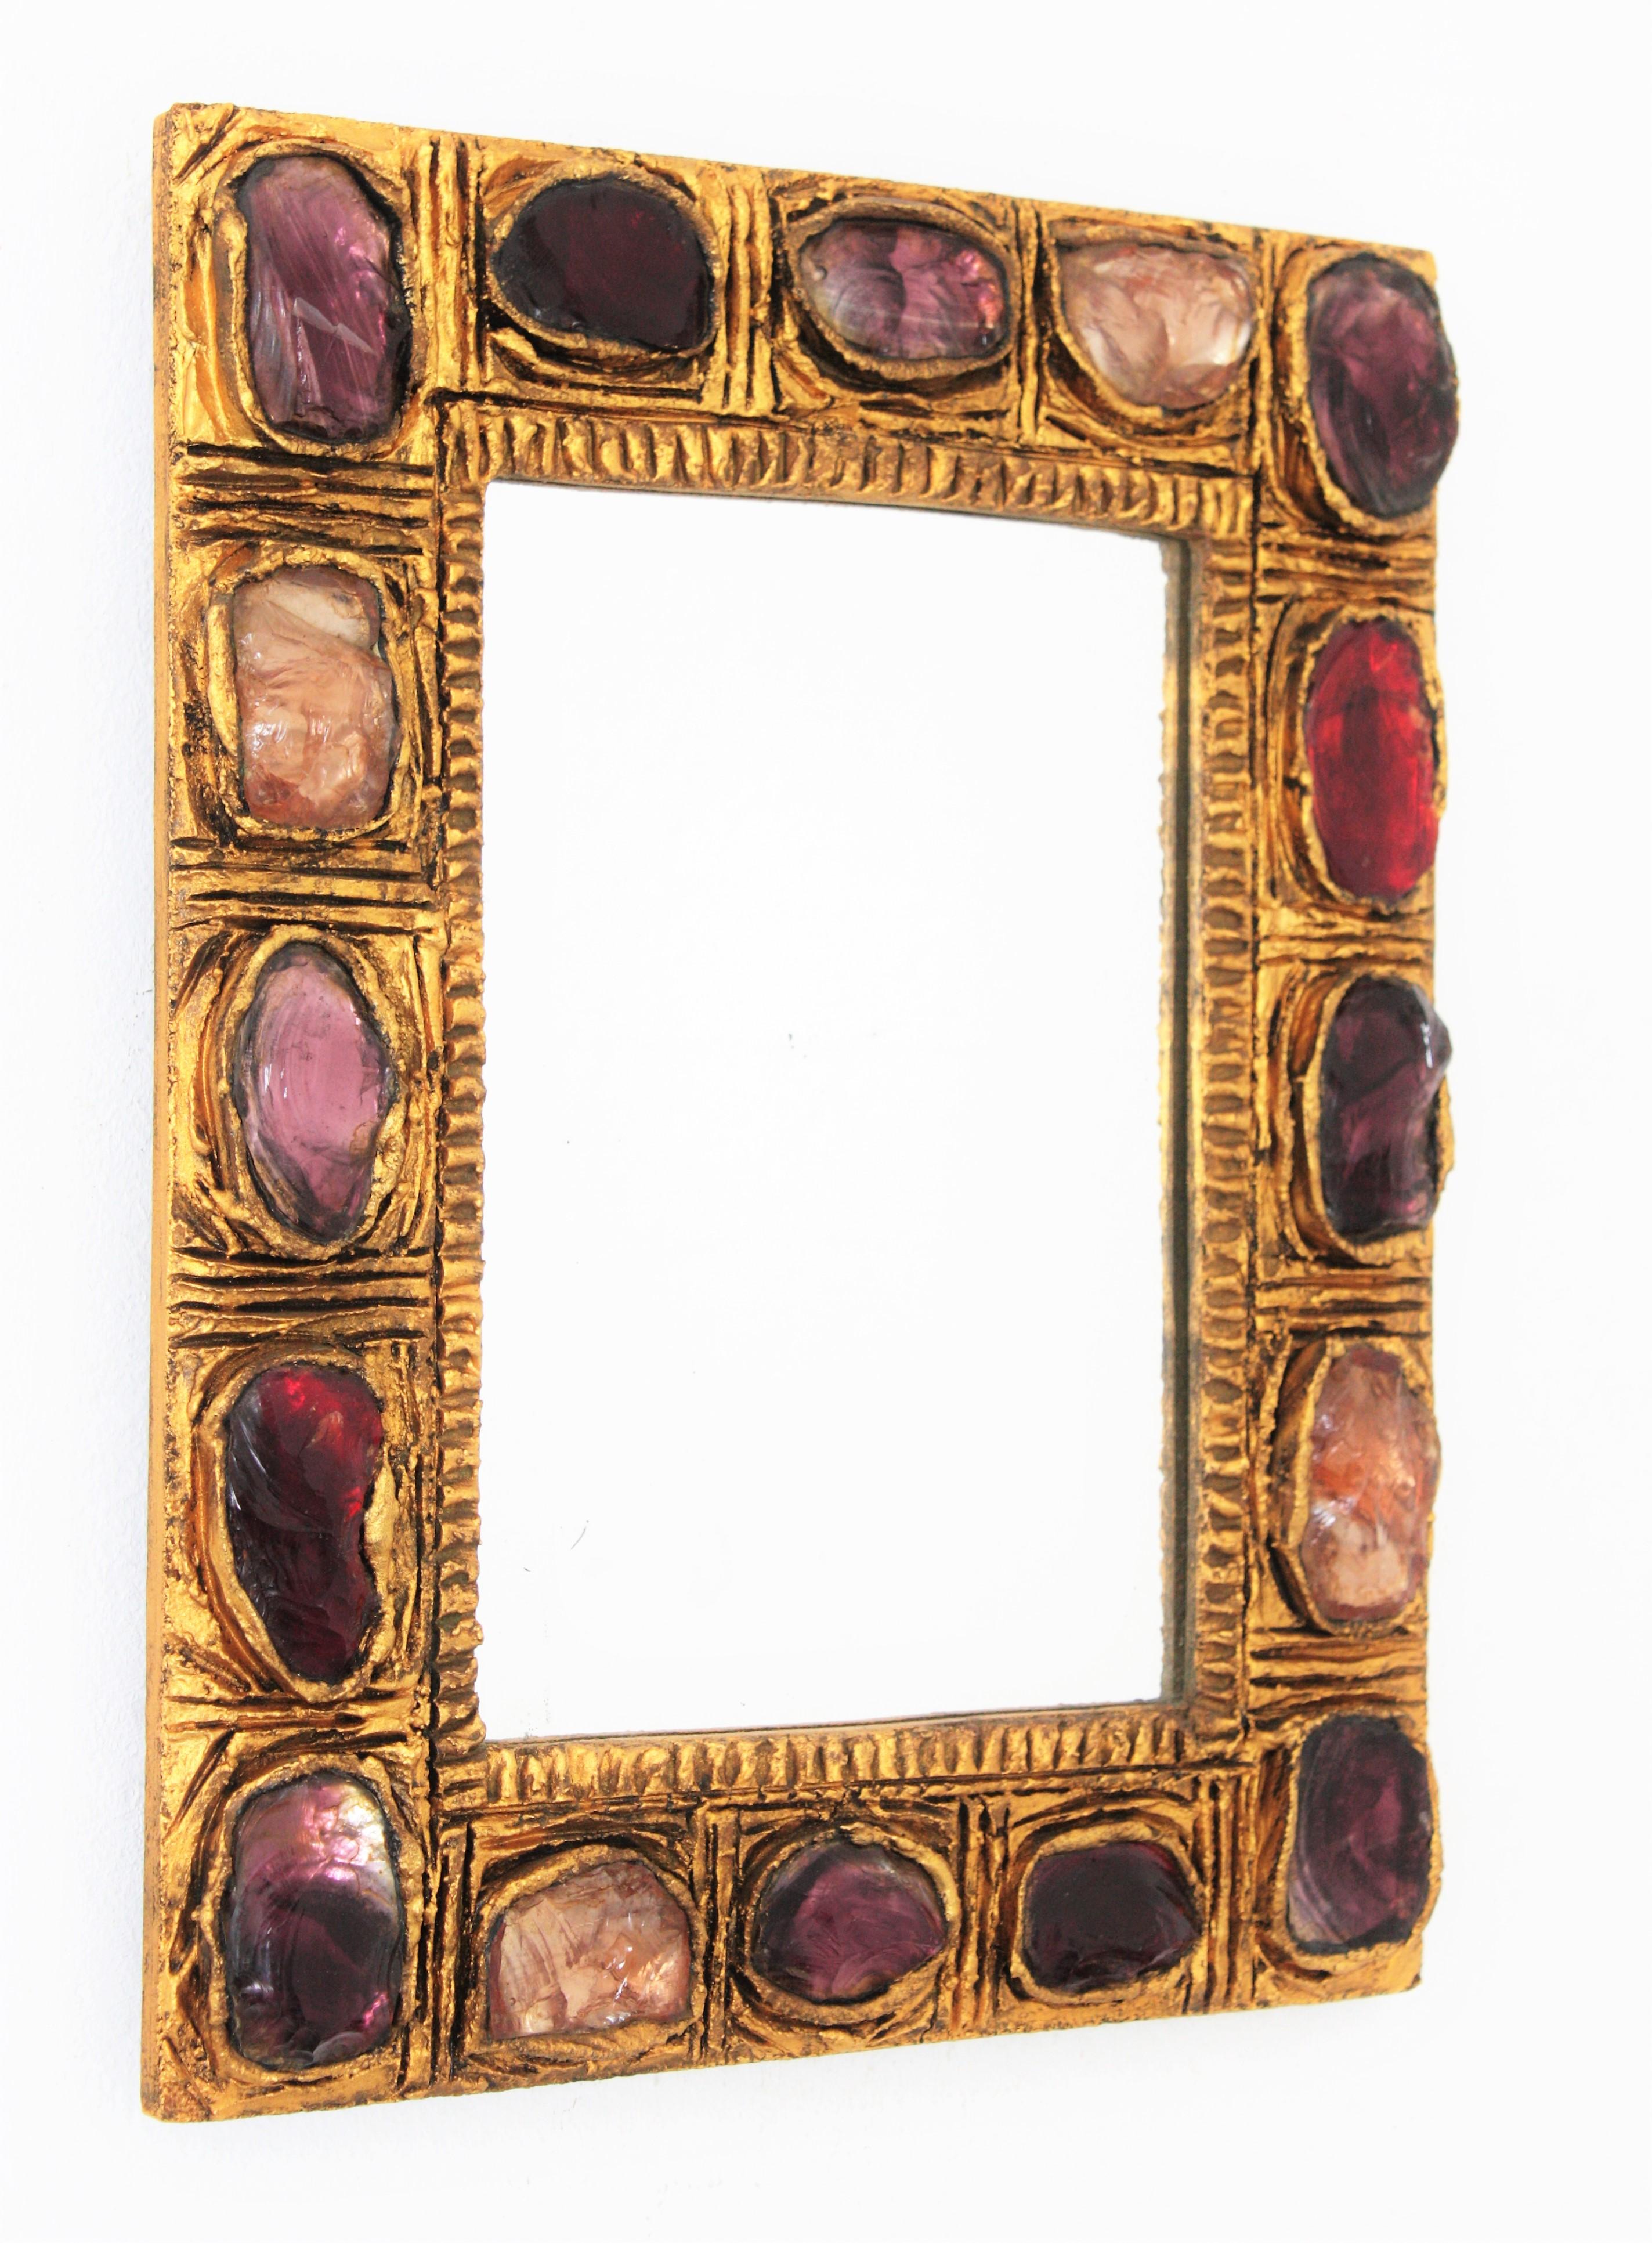 Rare Mid-20th century handcrafted rectangular mirror made of stucco with cased pink, purple and rubi red rock crystals on the frame. Beautiful frame made with pieces of colorful rock crystals and gold patinated finish. Lovely piece used as a vanity